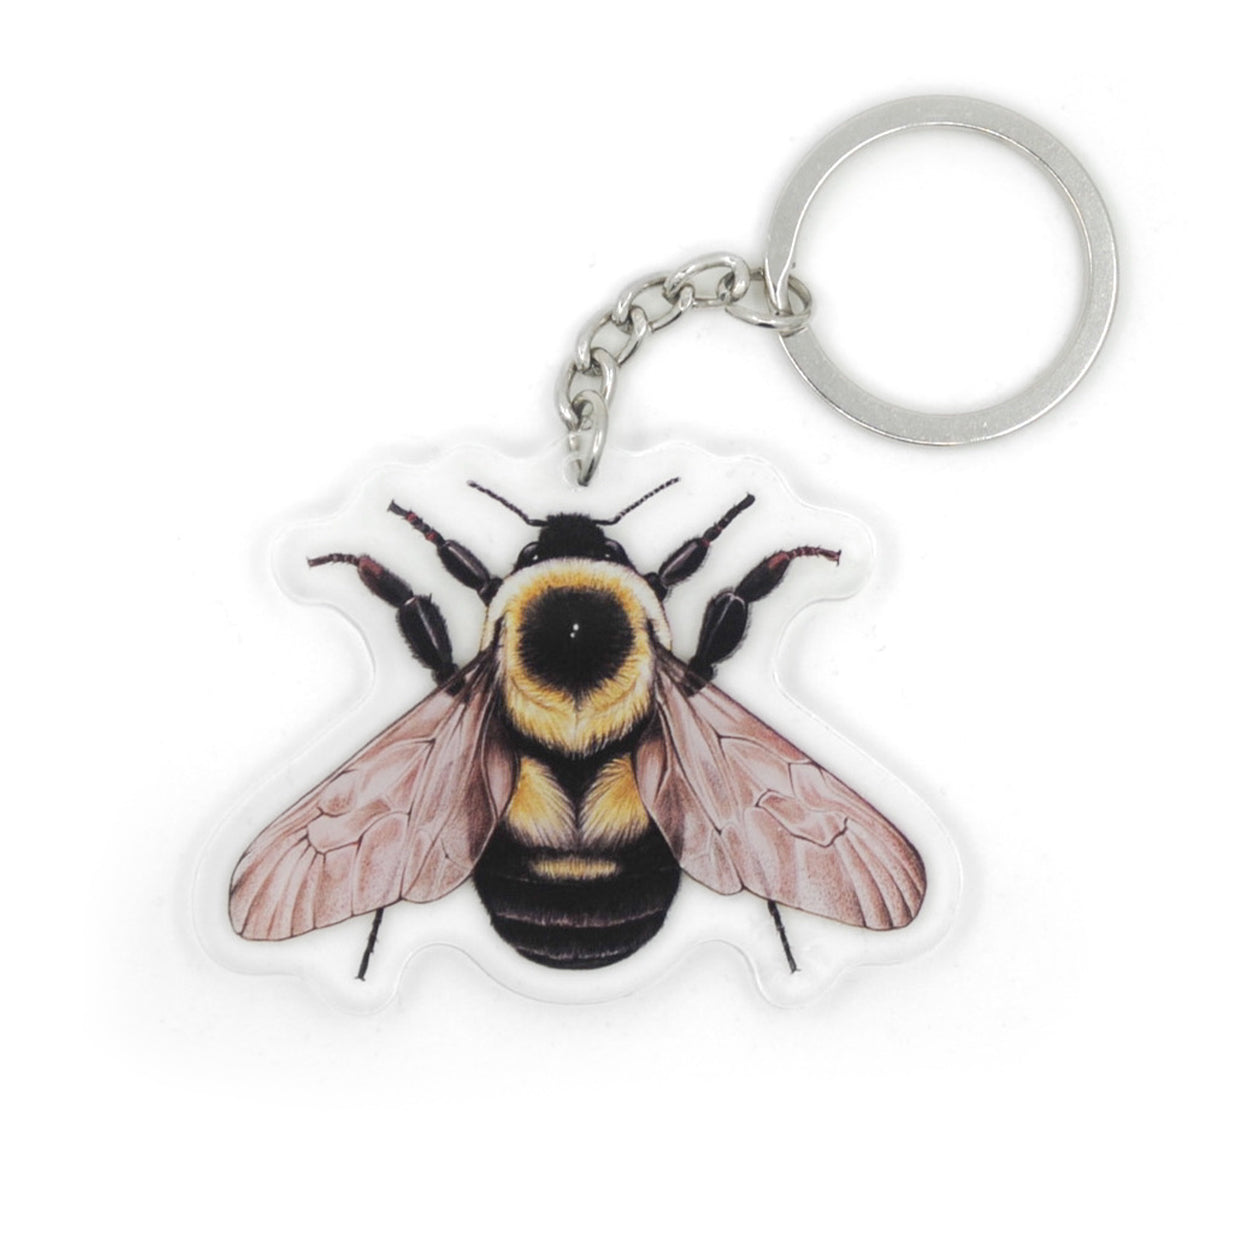 Two-spotted Bumble Bee Keychain